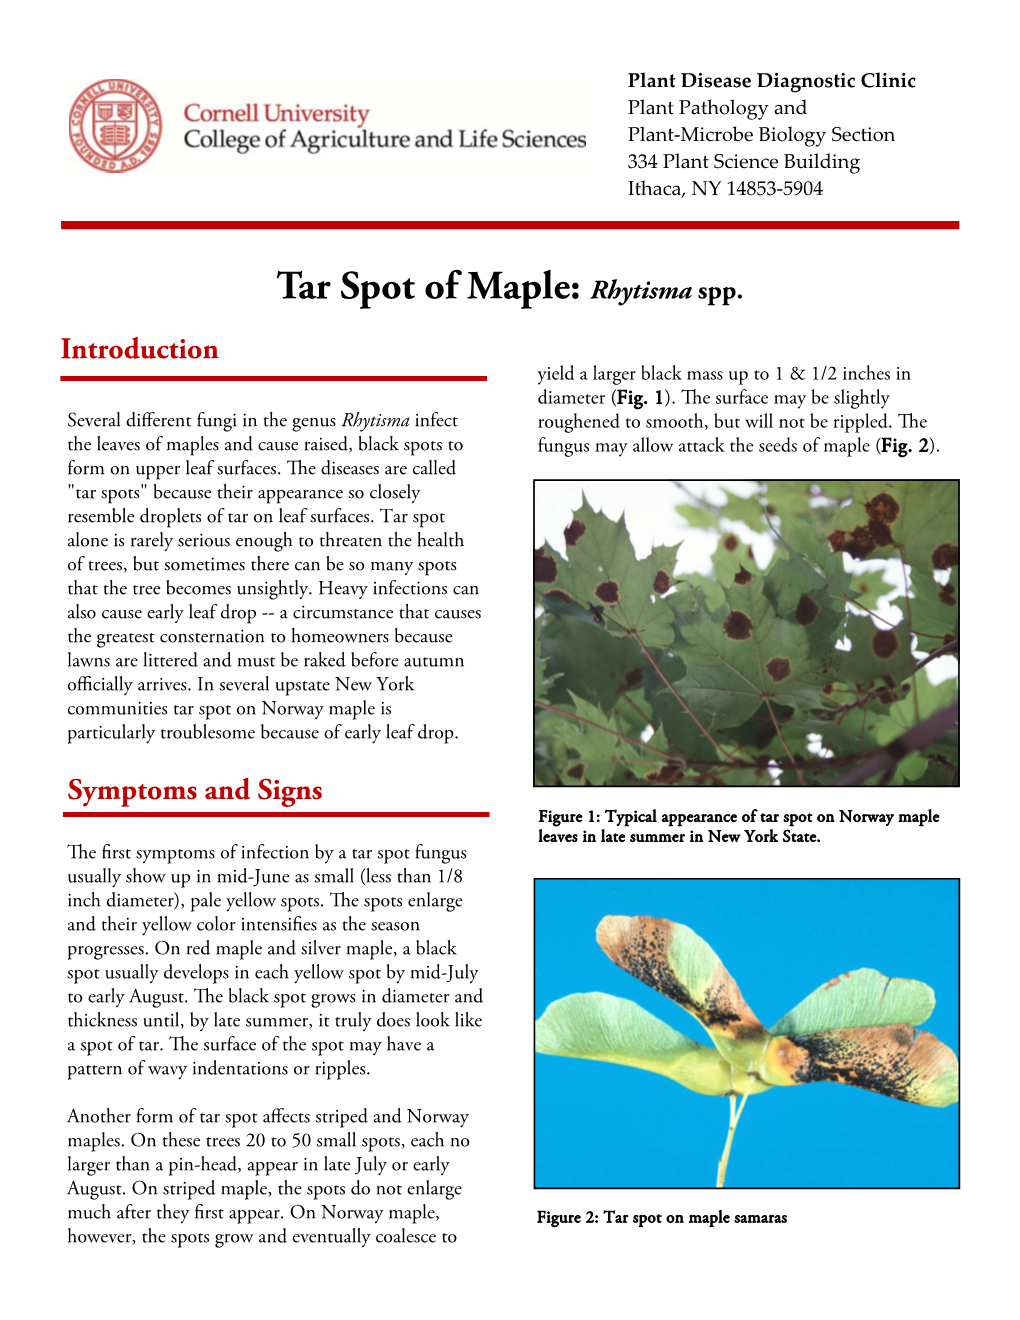 Tar Spot of Maple: Rhytisma Spp. Introduction Yield a Larger Black Mass up to 1 & 1/2 Inches in Diameter (Fig